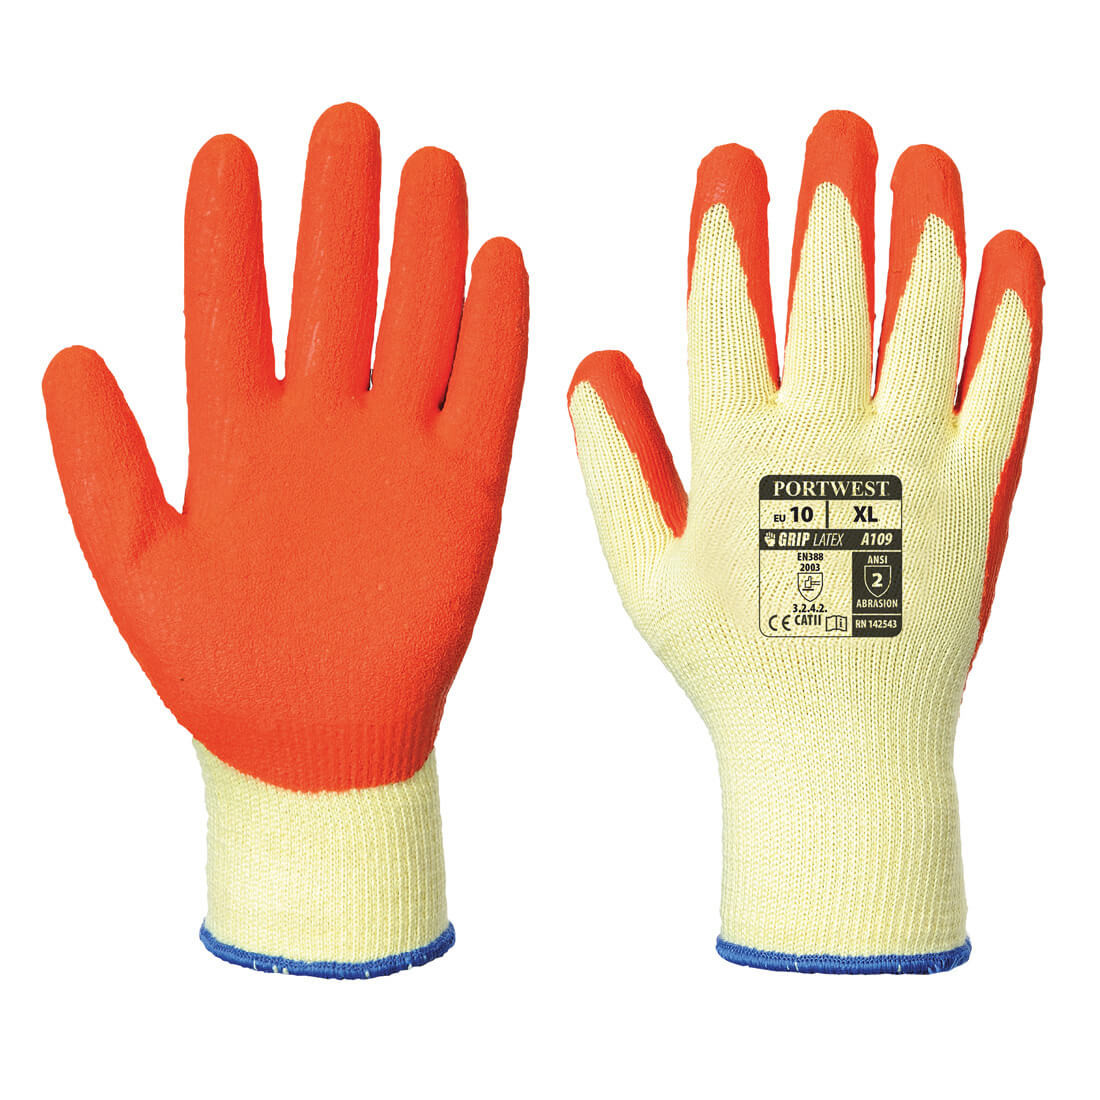 Grip Glove (with merchandise bag) - Personal protection